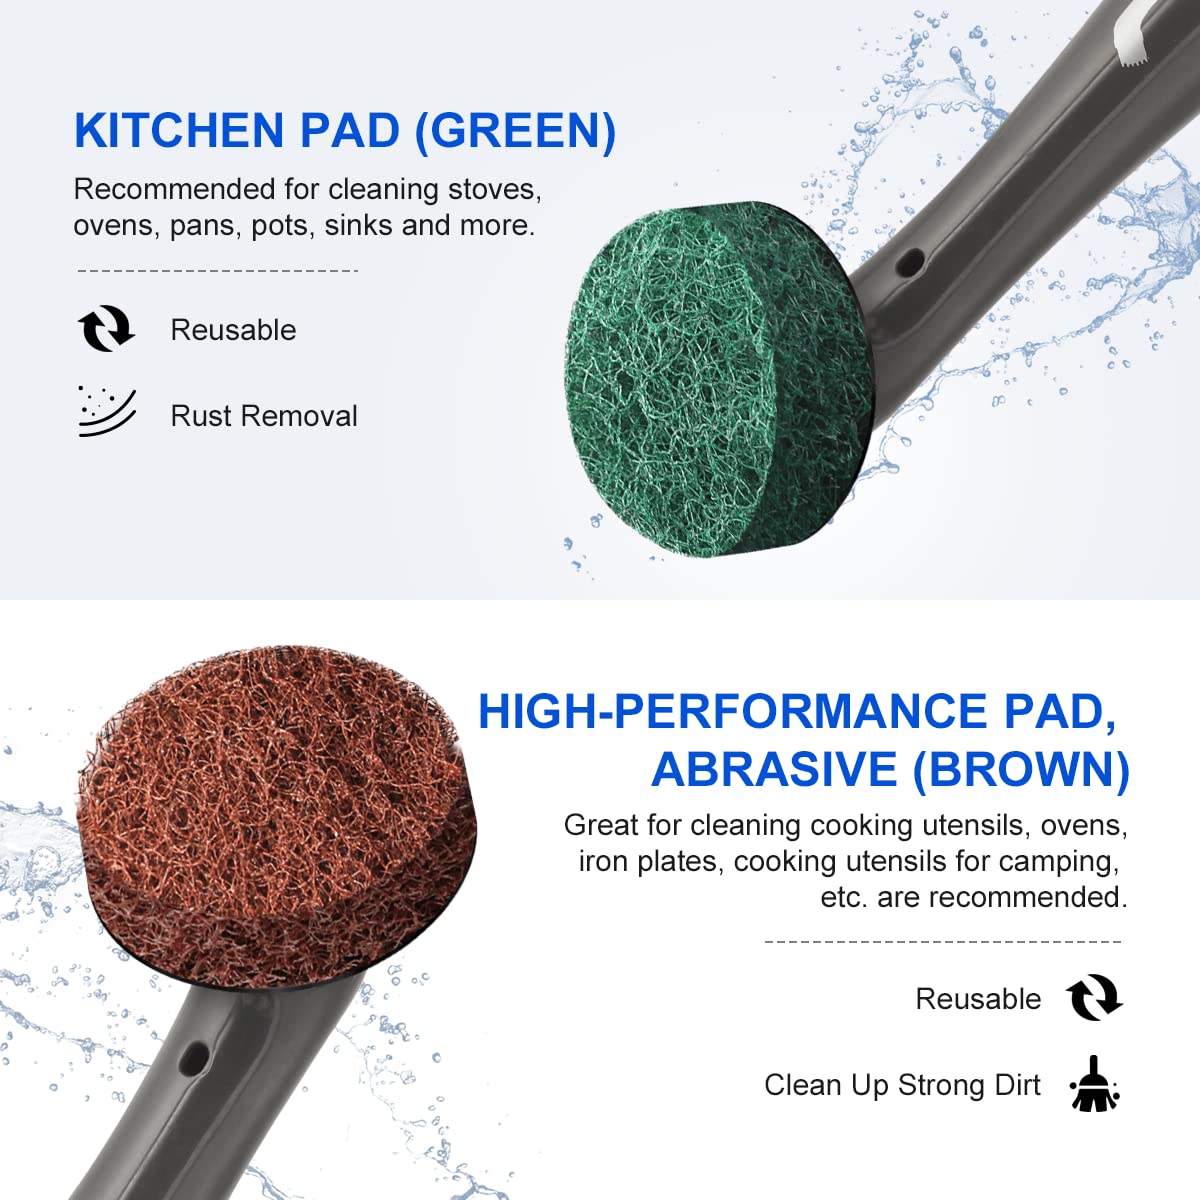 the brown polishing pad effectively removes burnt food and stubborn dirt; the green kitchen pad is a great help to clean almost all types of dirt and make stoves, ovens, pans, pots and sinks look great again; 